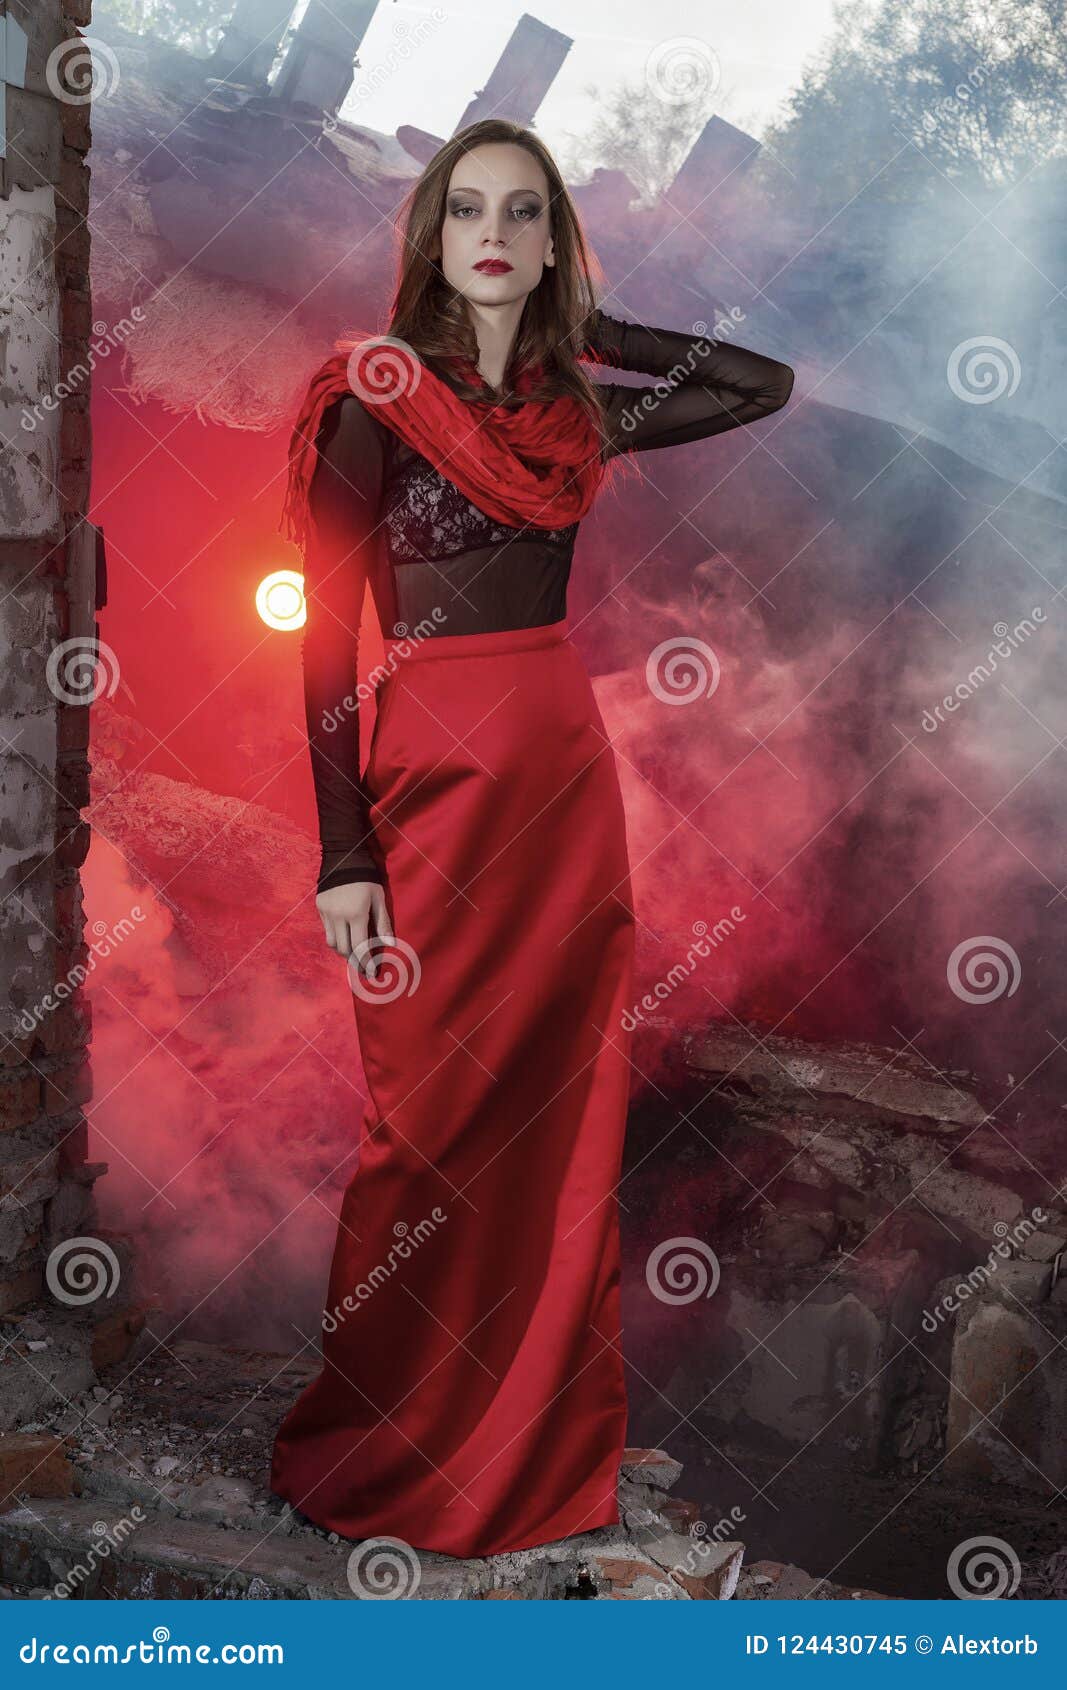 Beautiful Fashion Model Girl Wearing A Red Long Skirt And A Red Shawl Poses  At The Collapsed Building, Among The Ruins Of Which Rises Red Smoke.  Conceptual, Fashionable, Modern And Advertising Design.